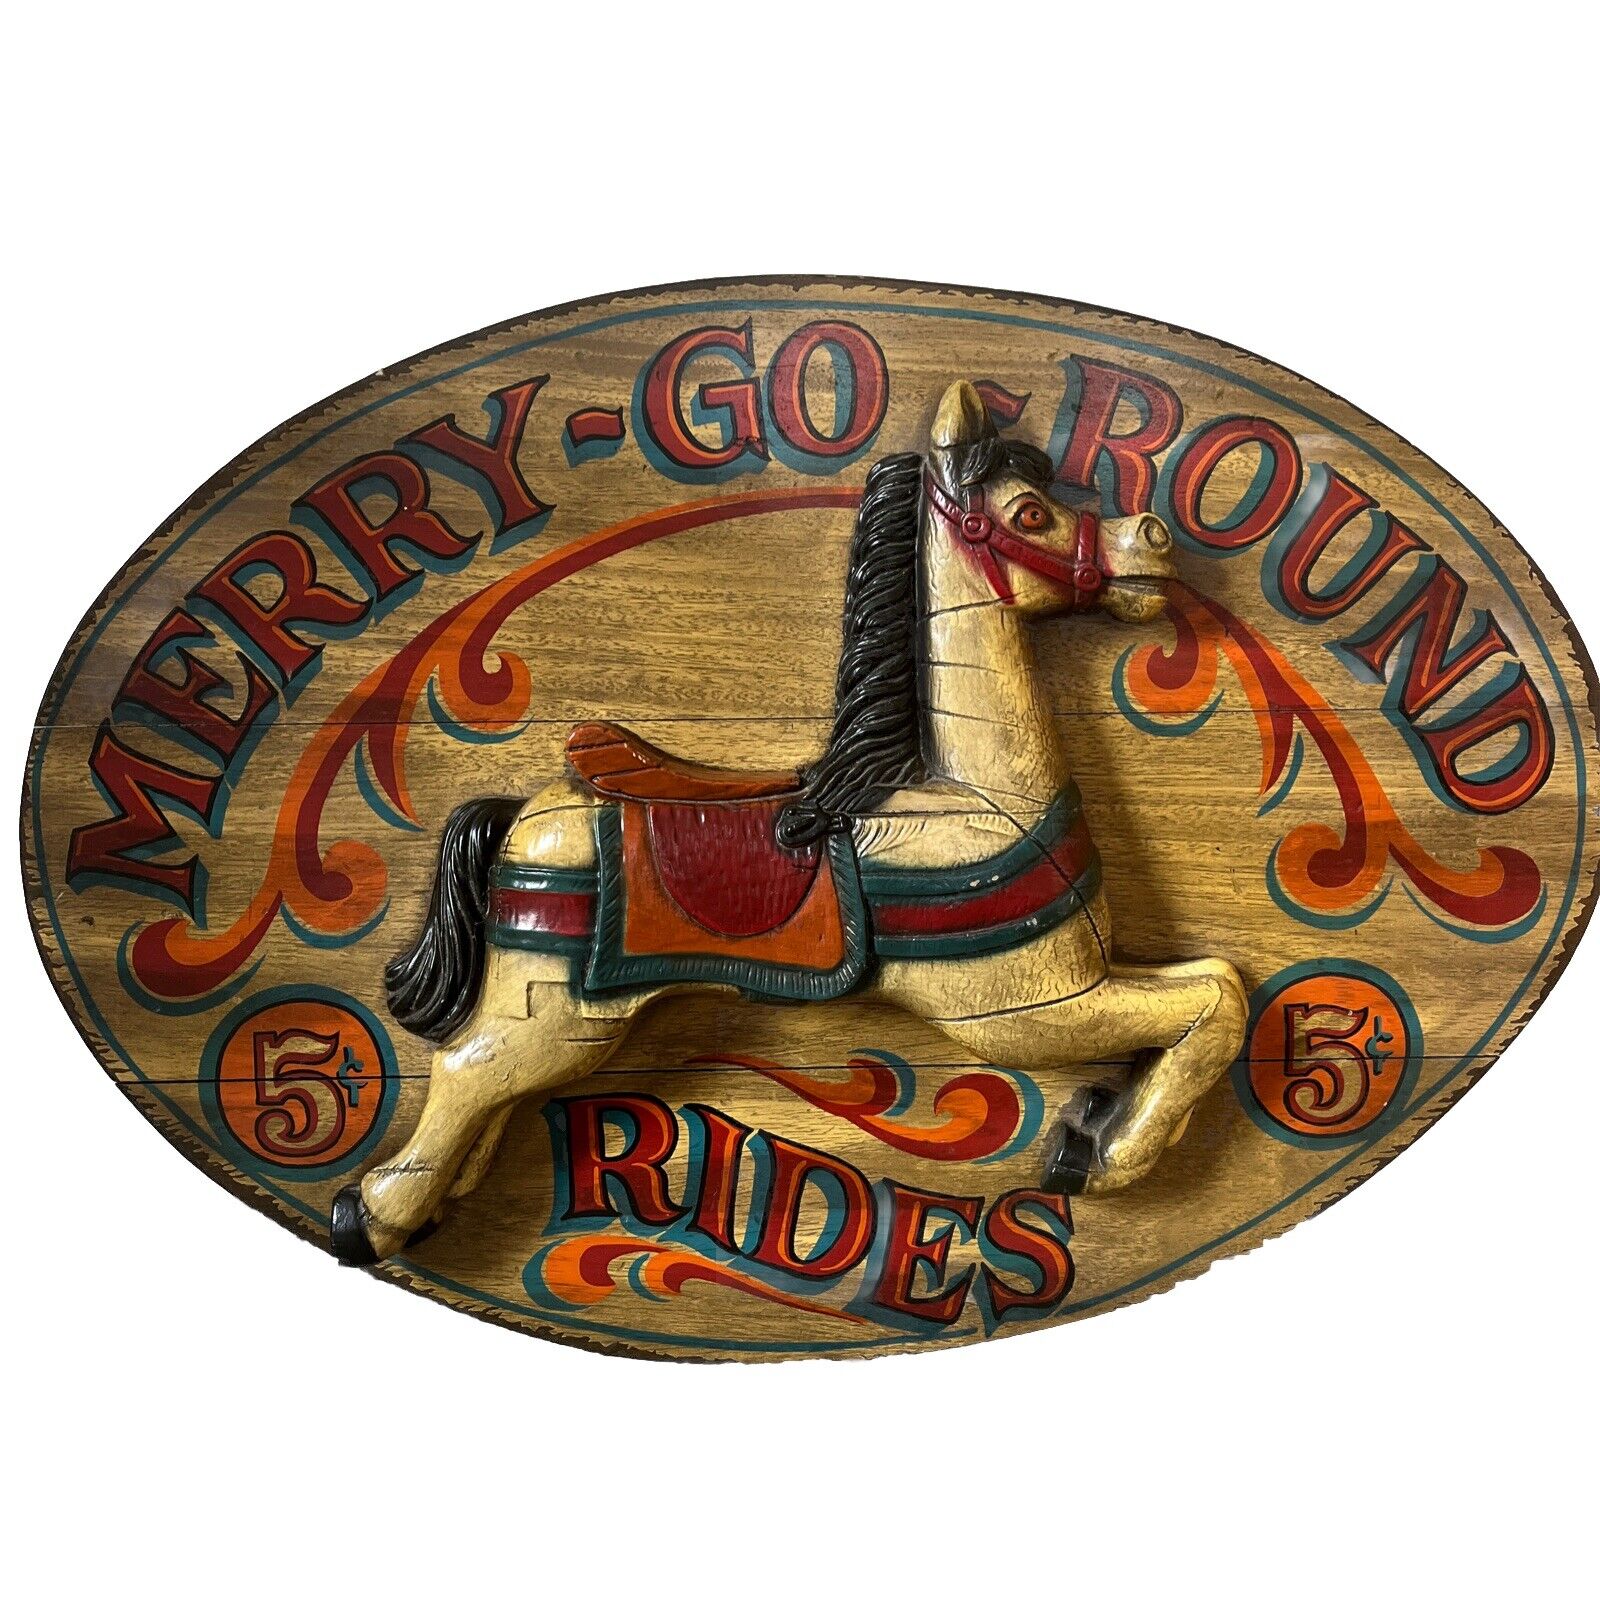 VTG MERRY GO ROUND RIDES 5 CENTS WOOD 3D HORSE CIRCUS SIGN 29” X 21” 5 Cents